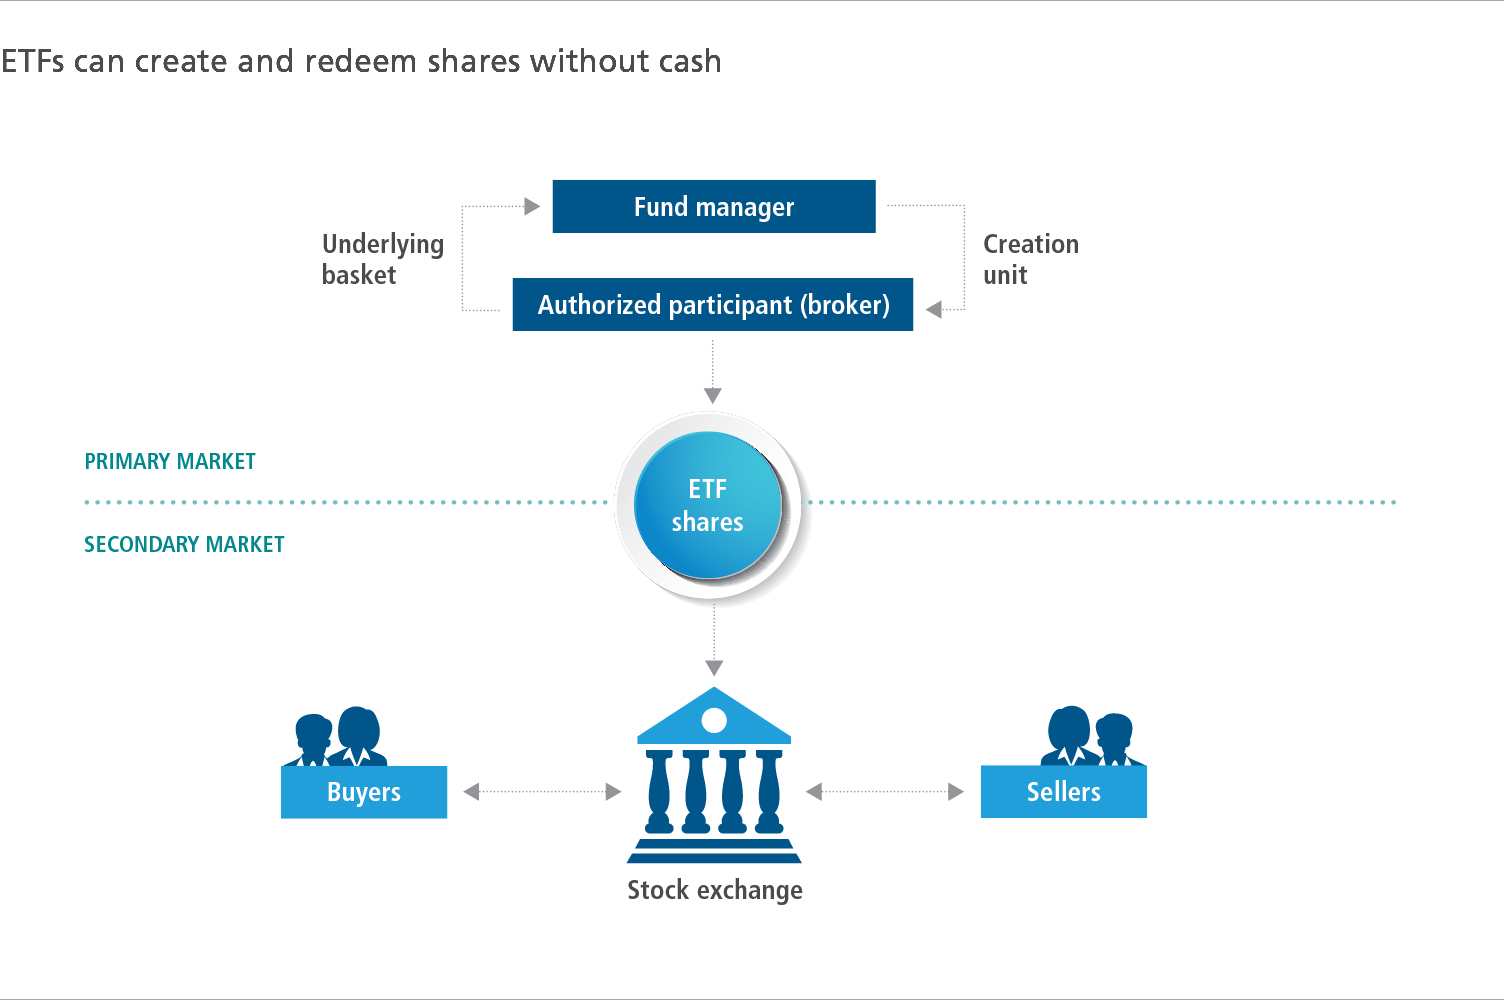 ETFs can create and redeem shares without cash